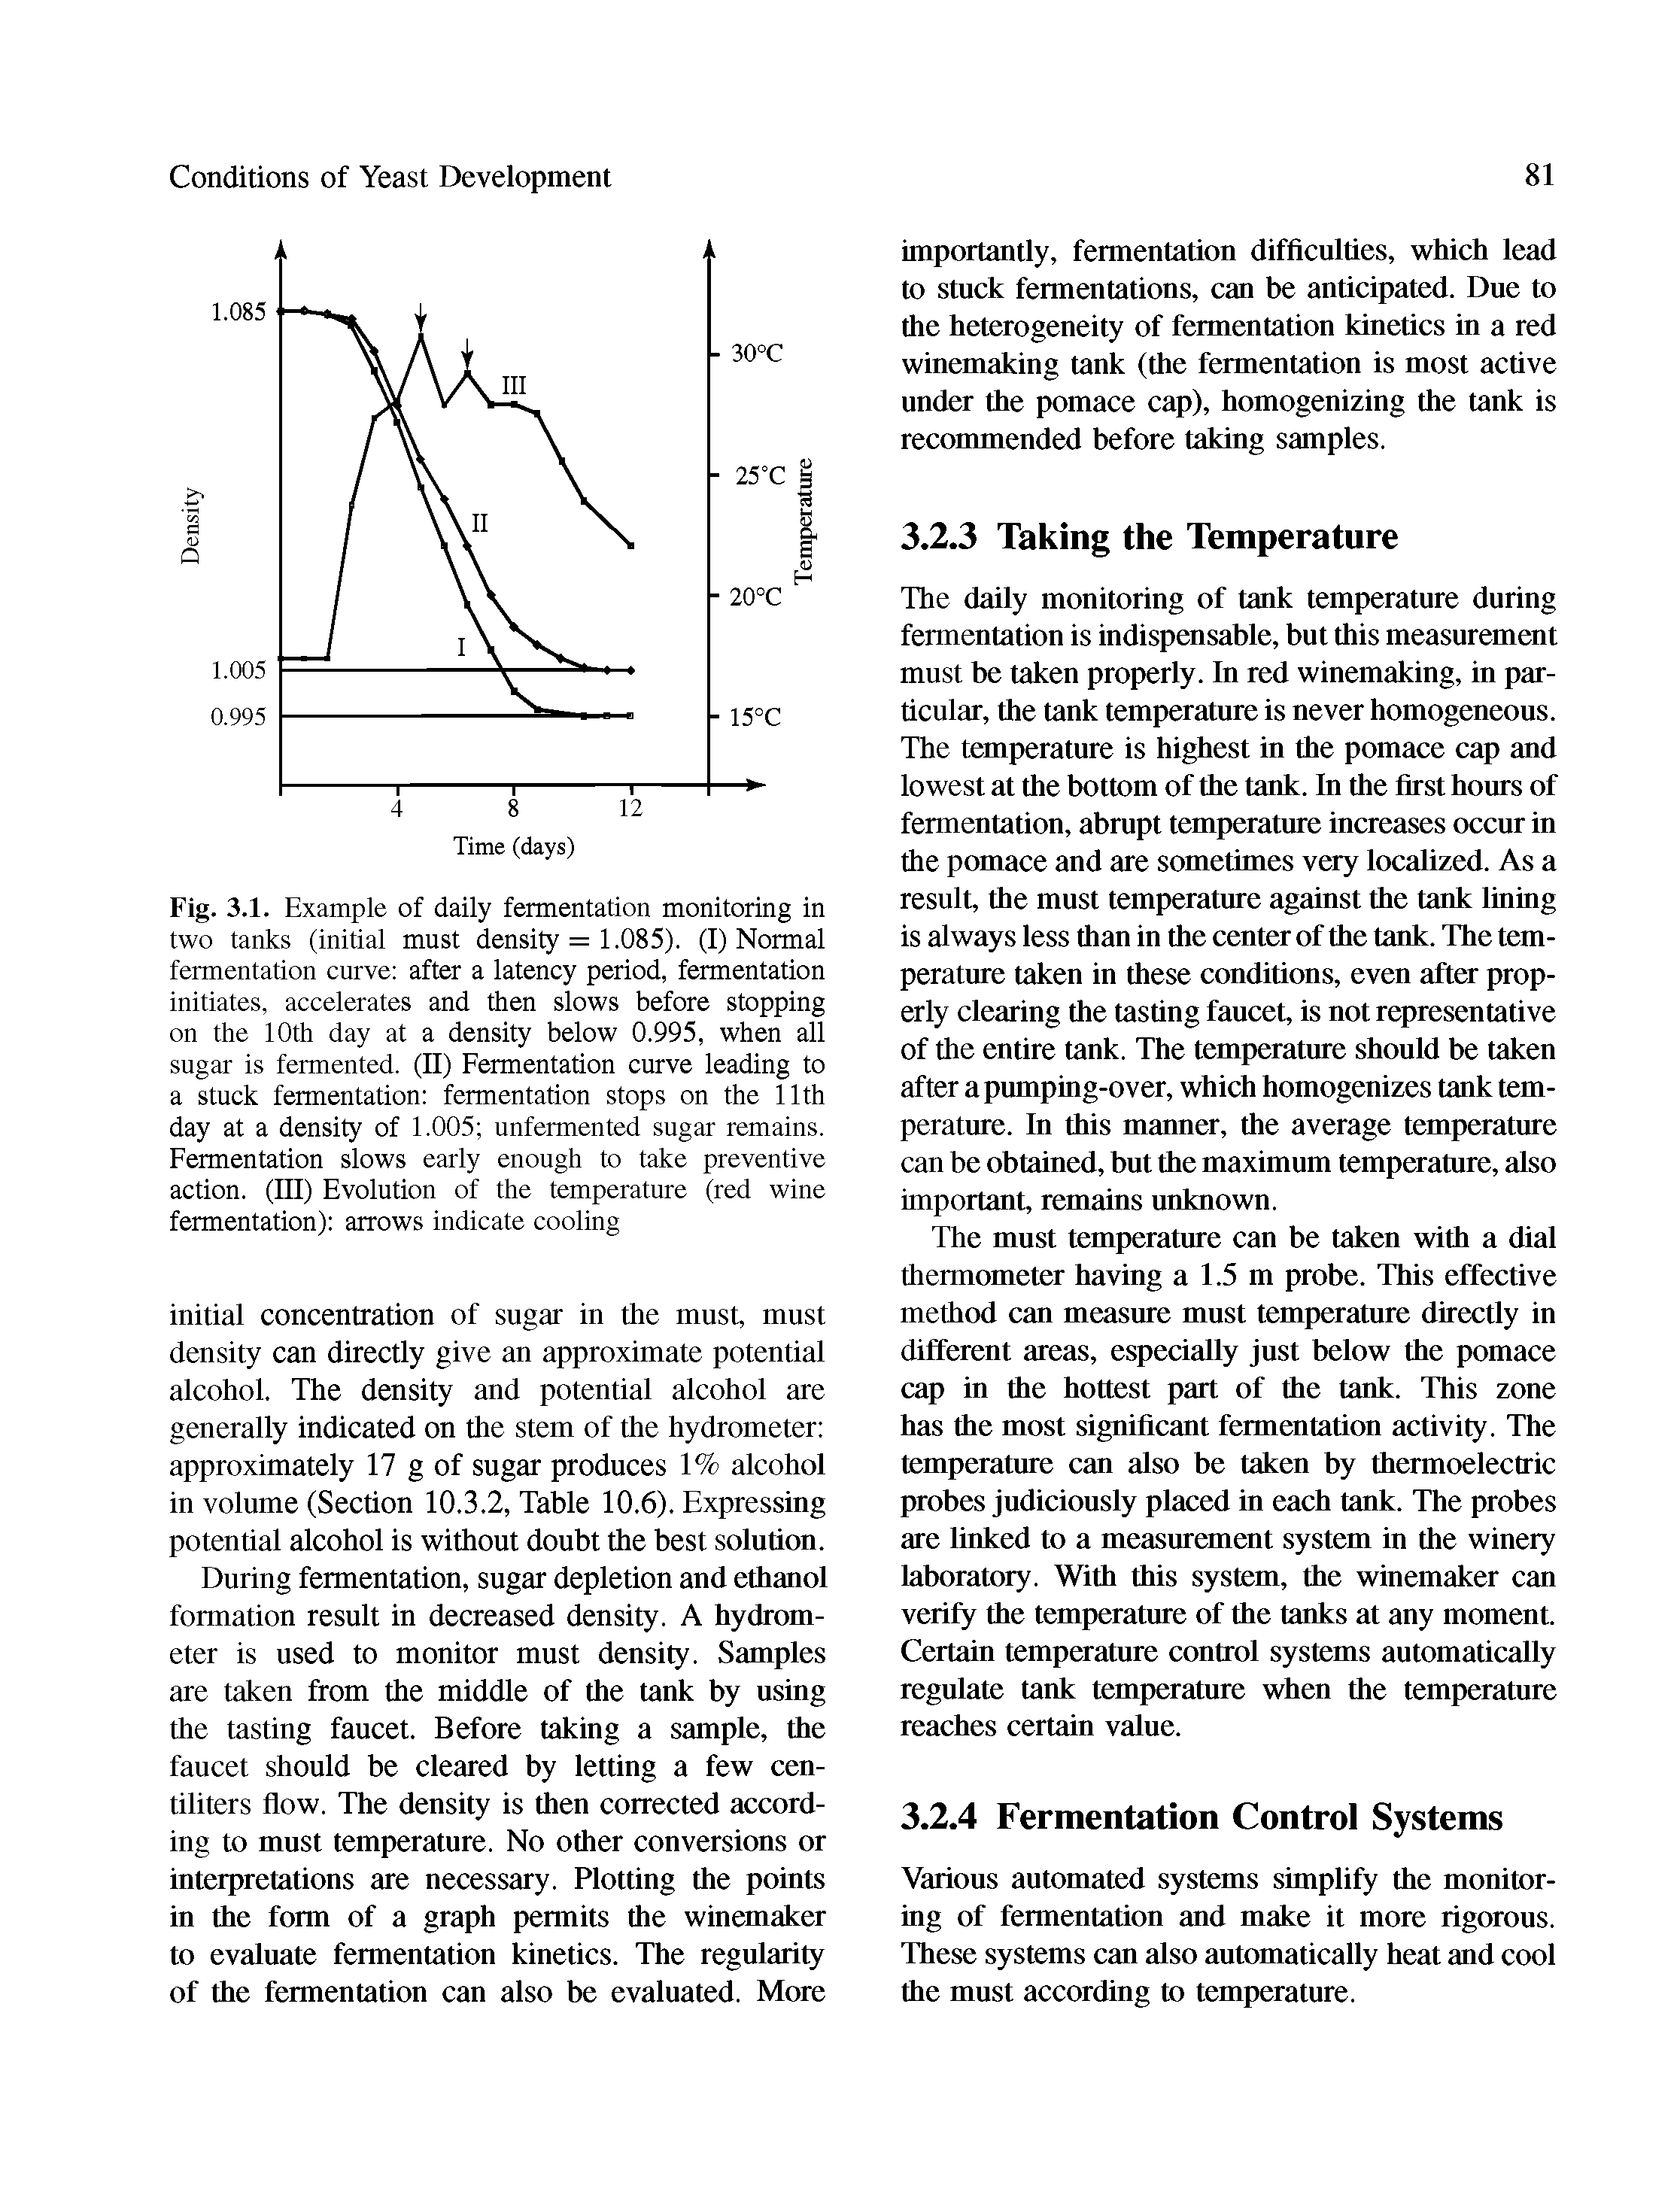 Fig. 3.1. Example of daily fermentation monitoring in two tanks (initial must density = 1.085). (I) Normal fermentation curve after a latency period, fermentation initiates, accelerates and then slows before stopping on the 10th day at a density below 0.995, when all sugar is fermented. (II) Fermentation curve leading to a stuck fermentation fermentation stops on the 11th day at a density of 1.005 unfermented sugar remains. Fermentation slows early enough to take preventive action. (Ill) Evolution of the temperature (red wine fermentation) arrows indicate cooling...